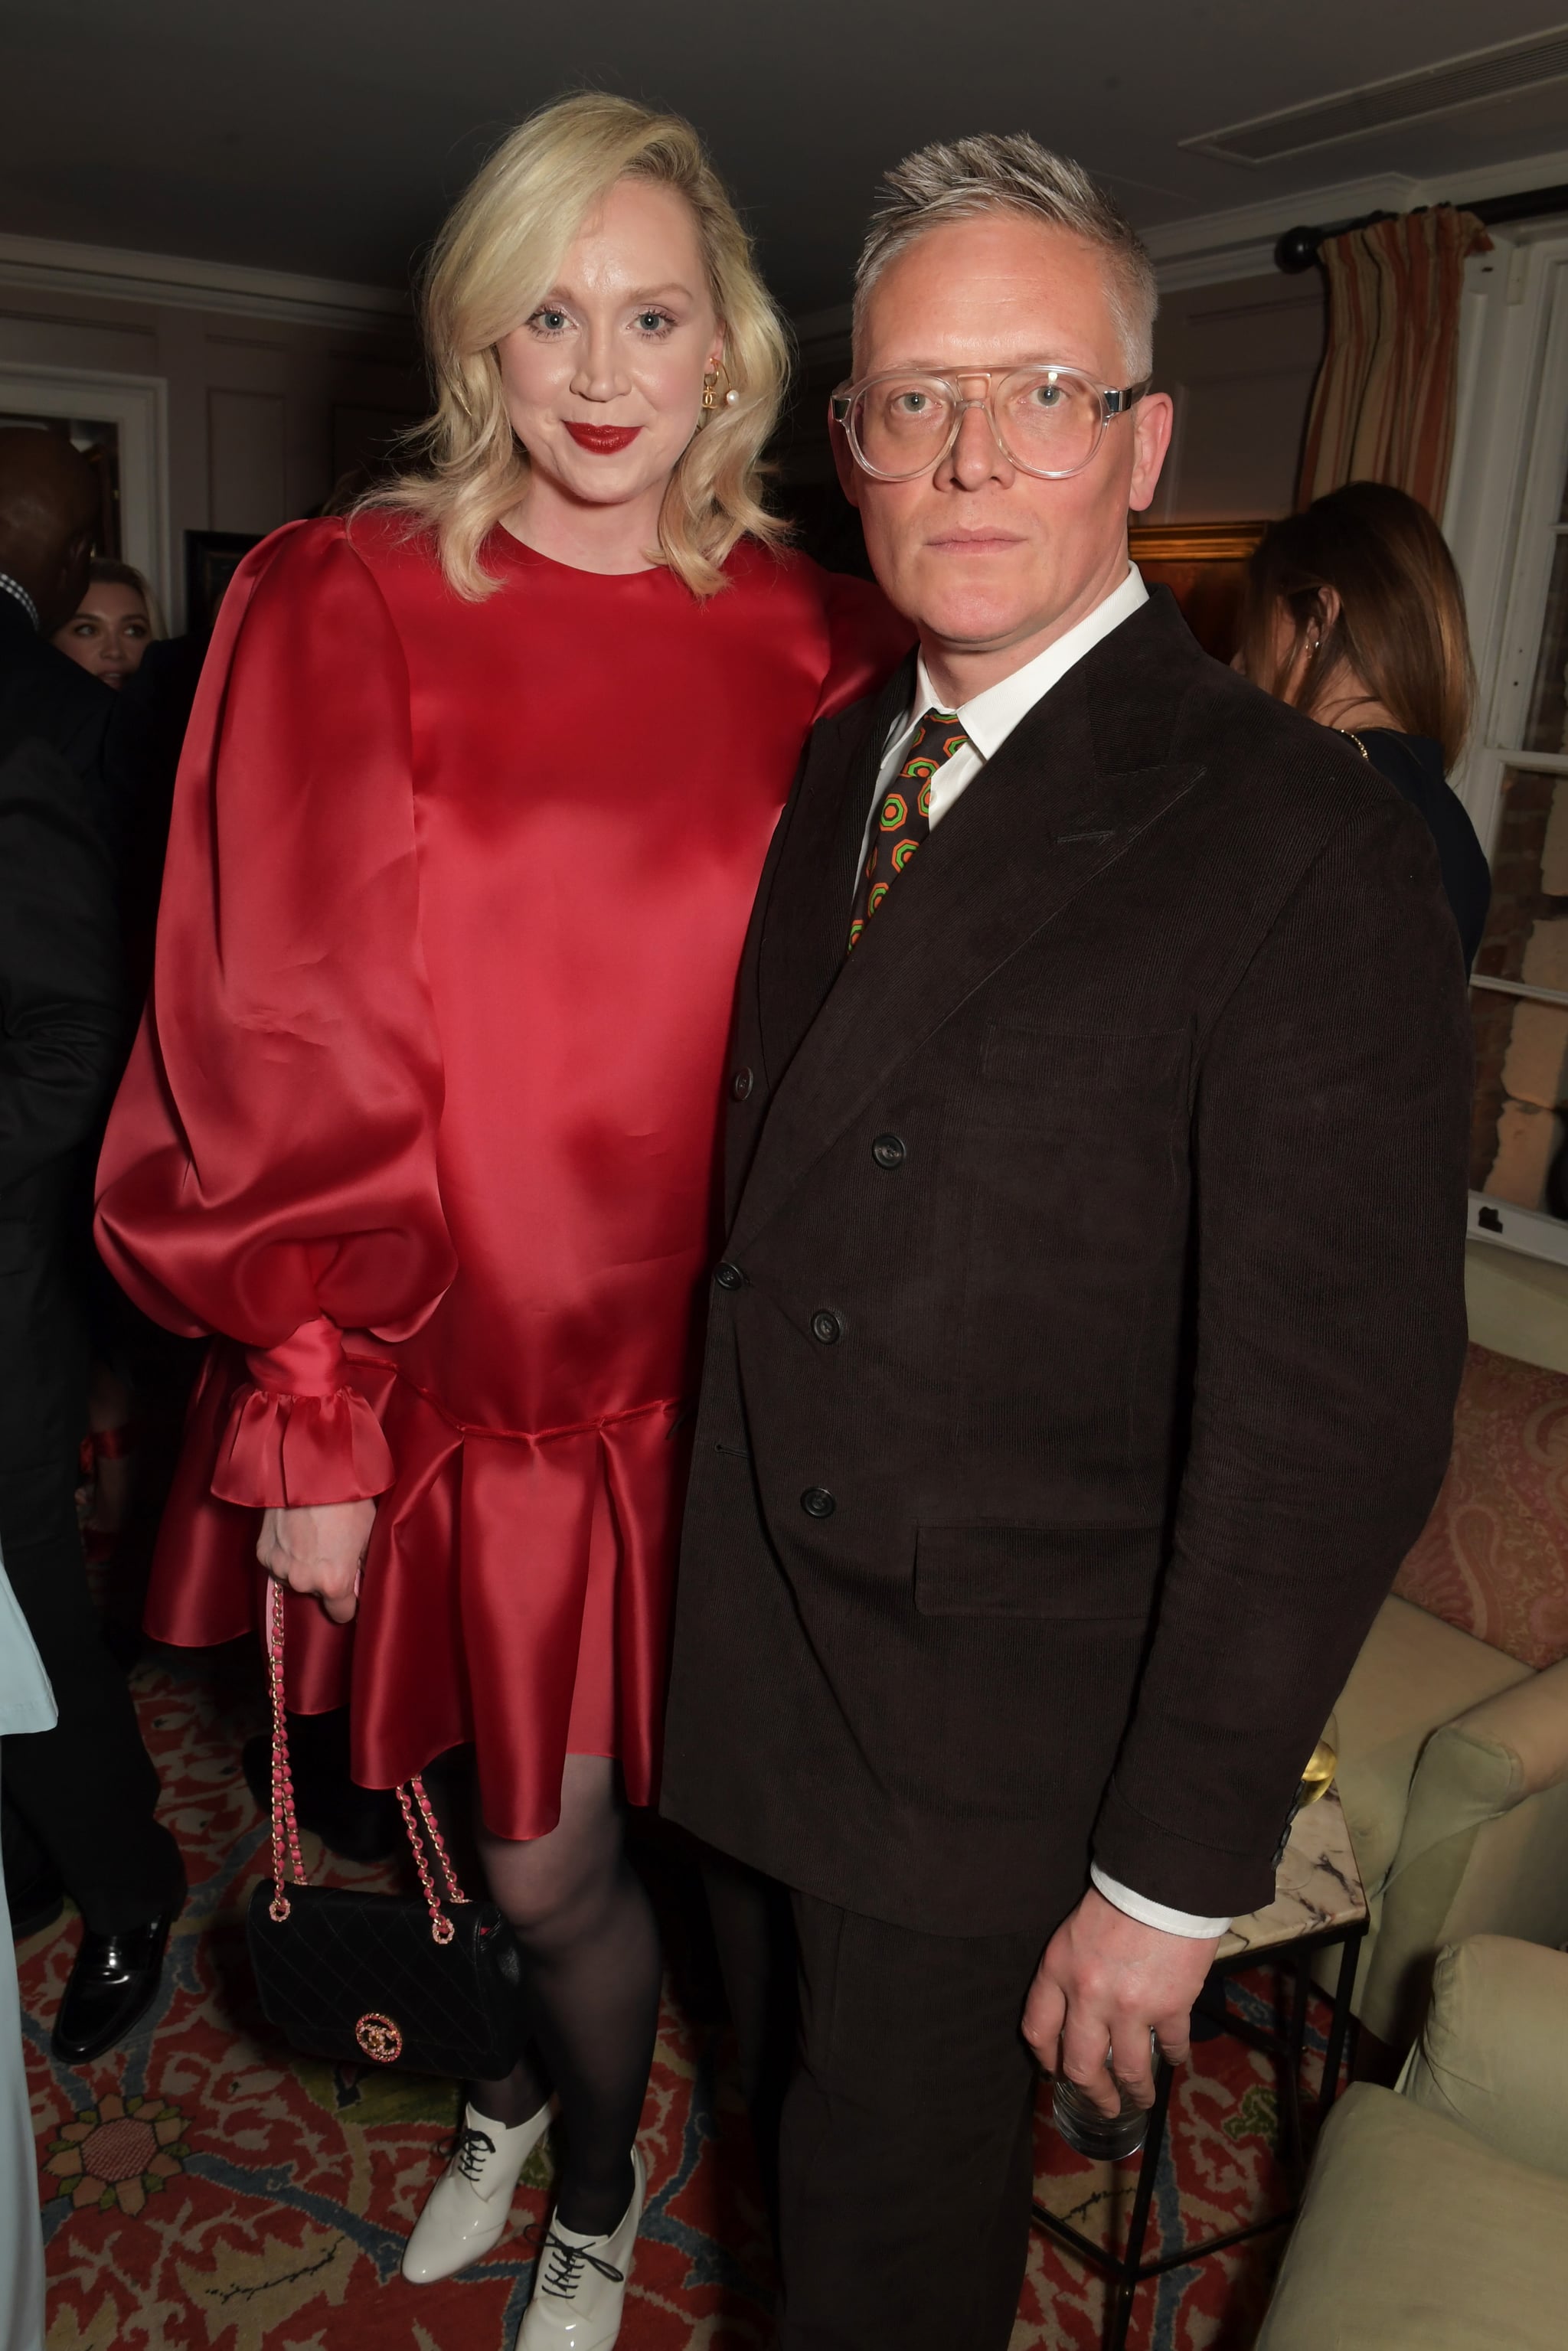 LONDON, ENGLAND - FEBRUARY 01:    Gwendoline Christie and Giles Deacon arrive at the Charles Finch & CHANEL Pre-BAFTA Party at 5 Hertford Street on February 1, 2020 in London, England.  (Photo by David M. Benett/Dave Benett/Getty Images)